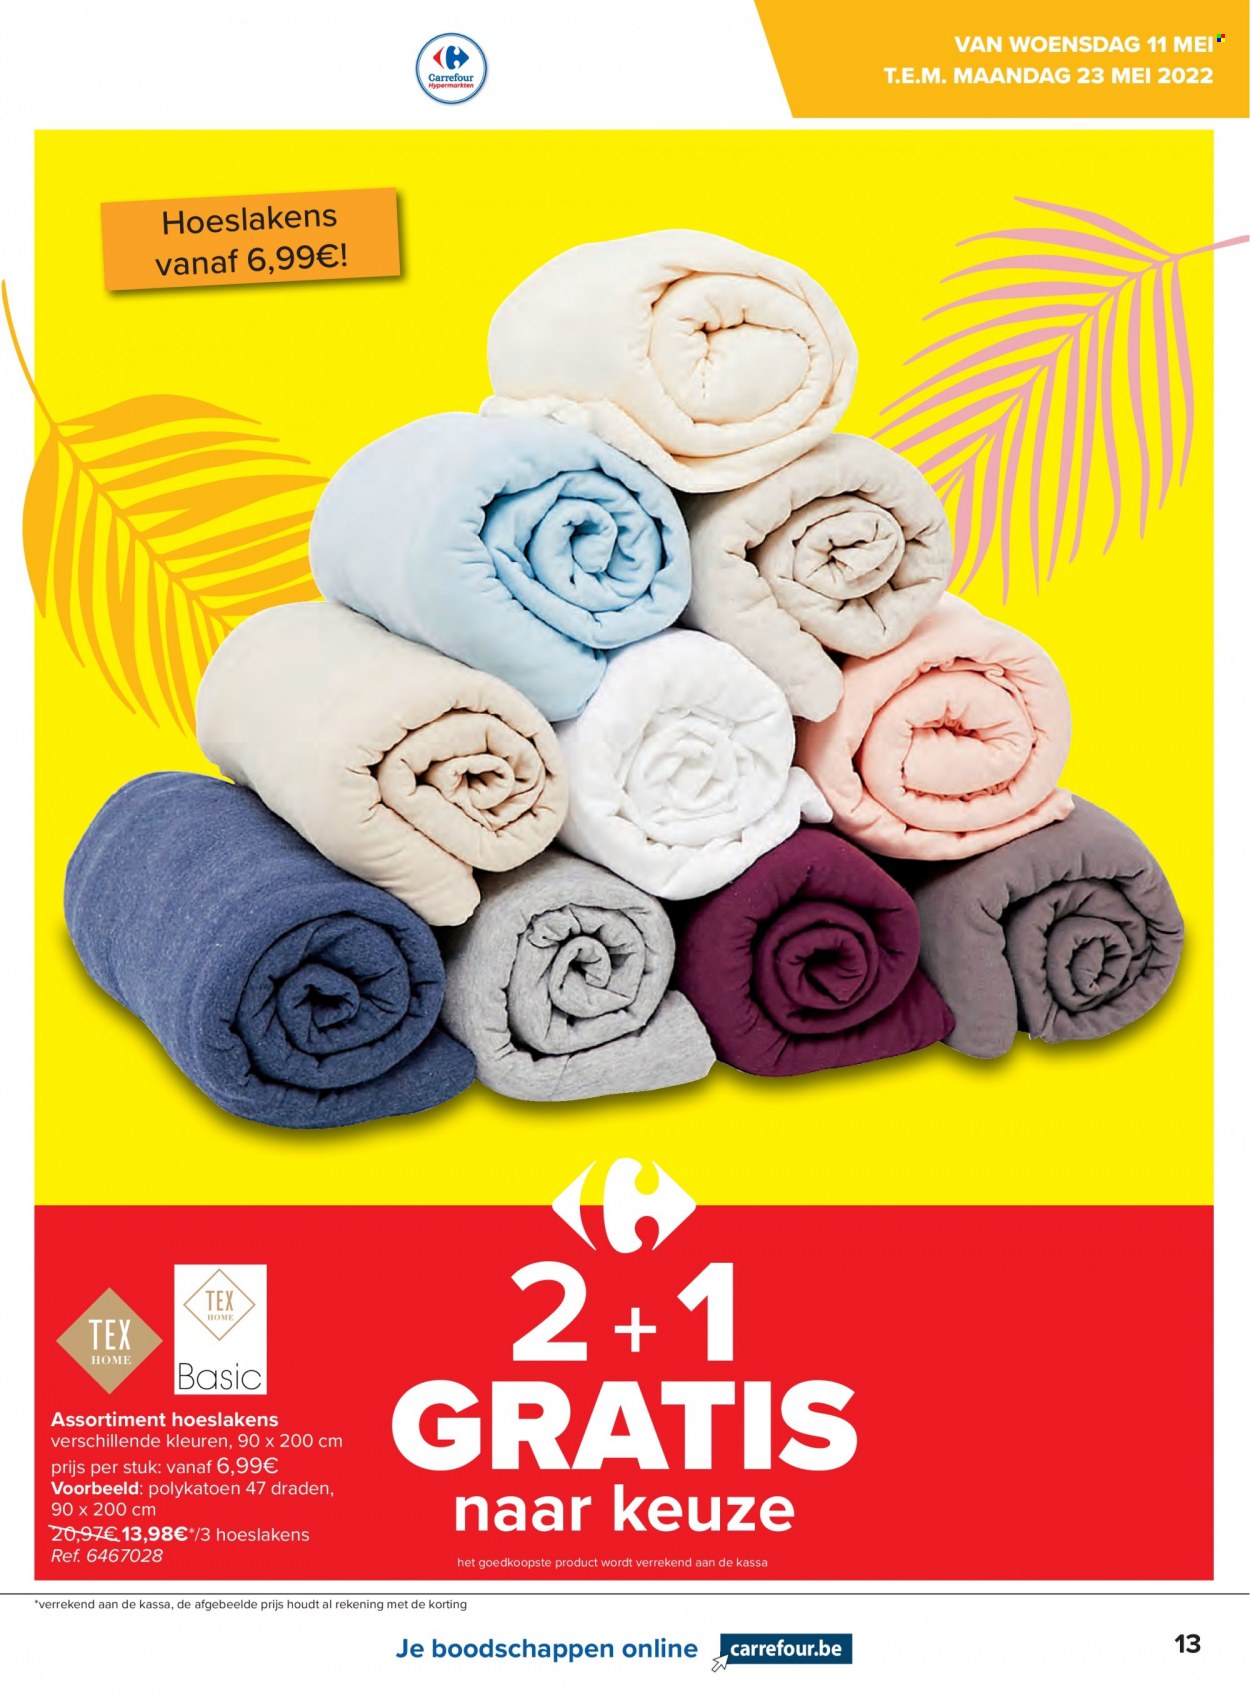 Catalogue Carrefour hypermarkt - 11.5.2022 - 23.5.2022. Page 13.